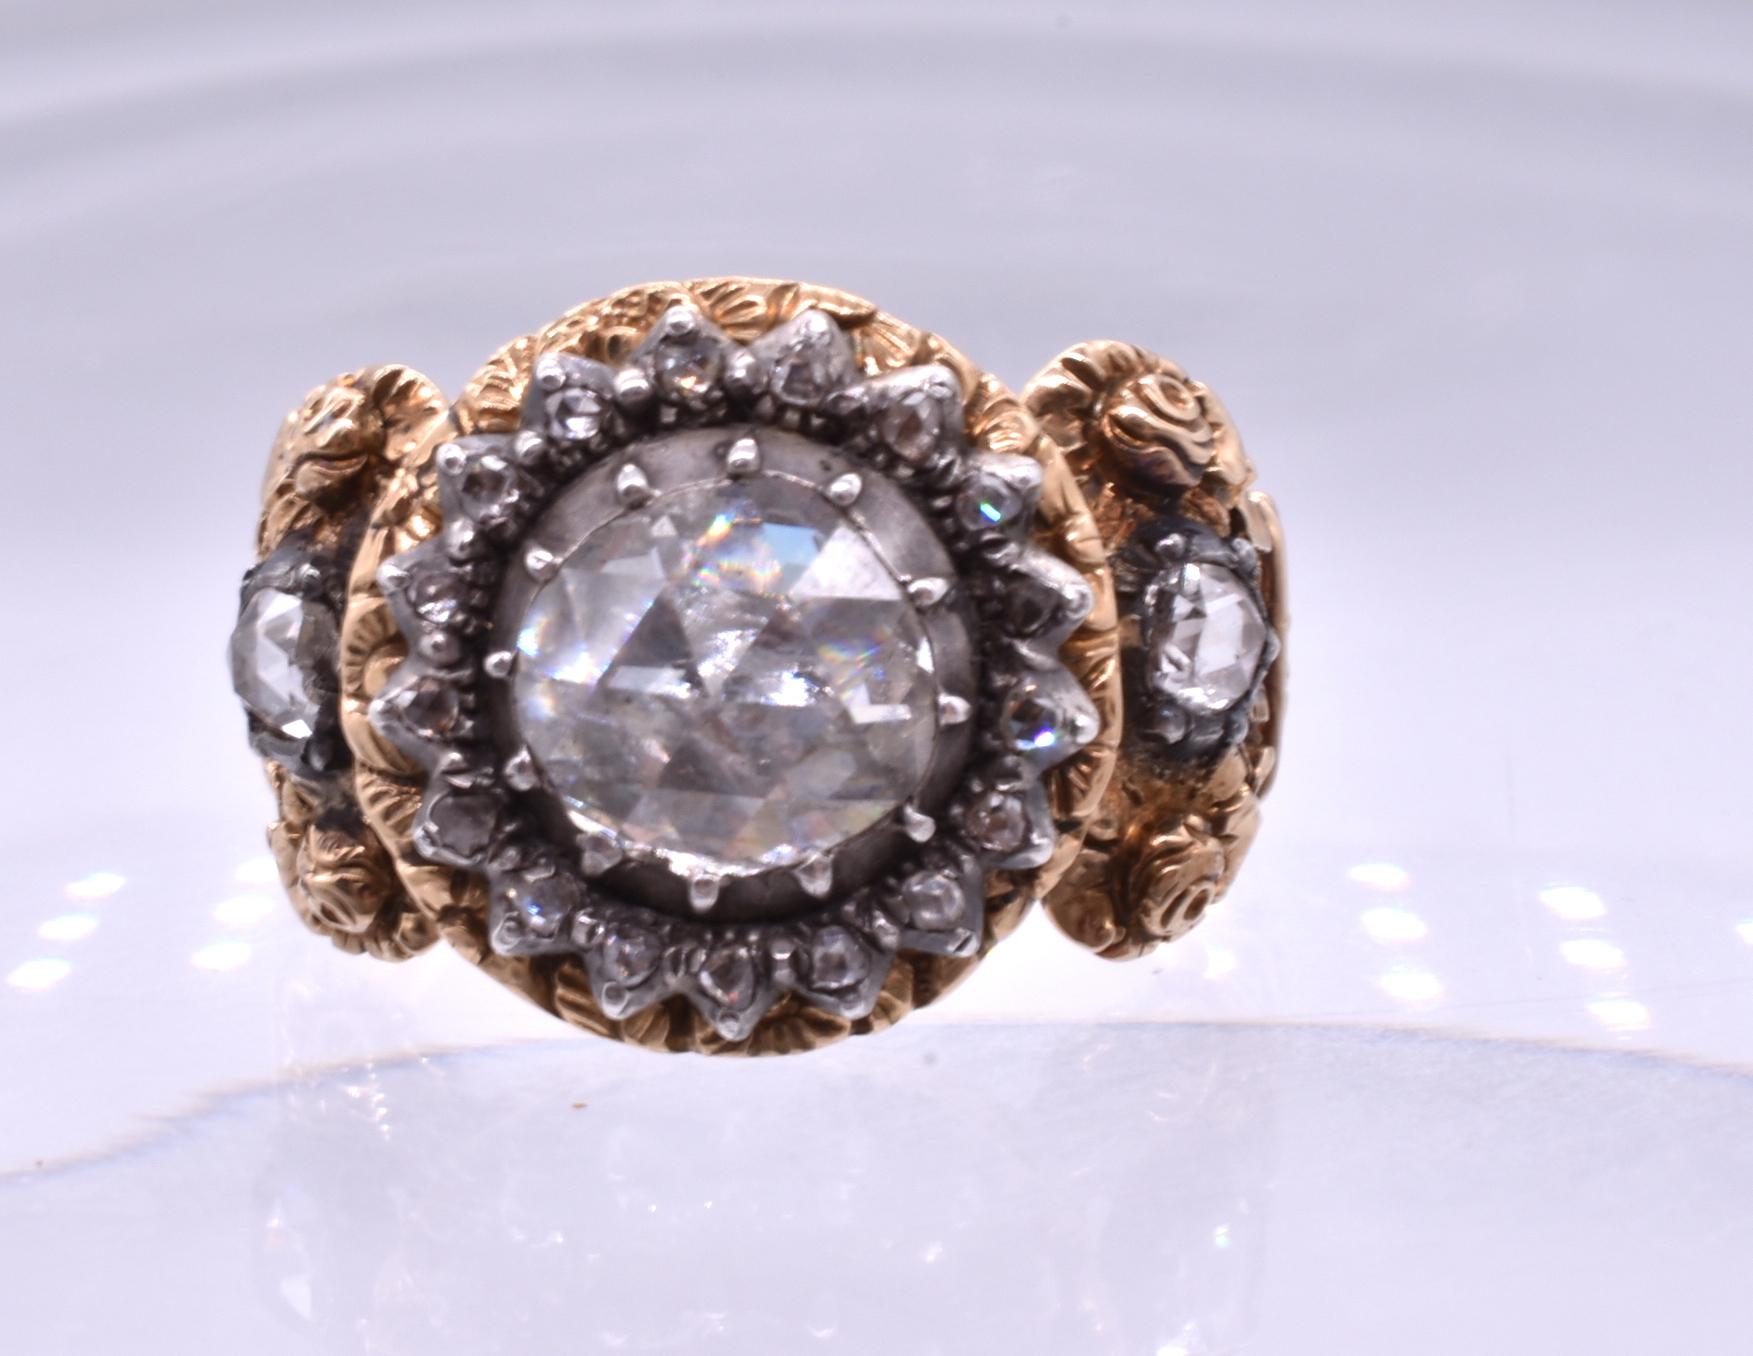 Ornate 18K Georgian repousse rose cut diamond ring which likely belonged to someone of nobility. This lavish Austrian or German ring pulls out all the stops with its intricately carved band and gorgeous rose cut diamond mounted in silver 